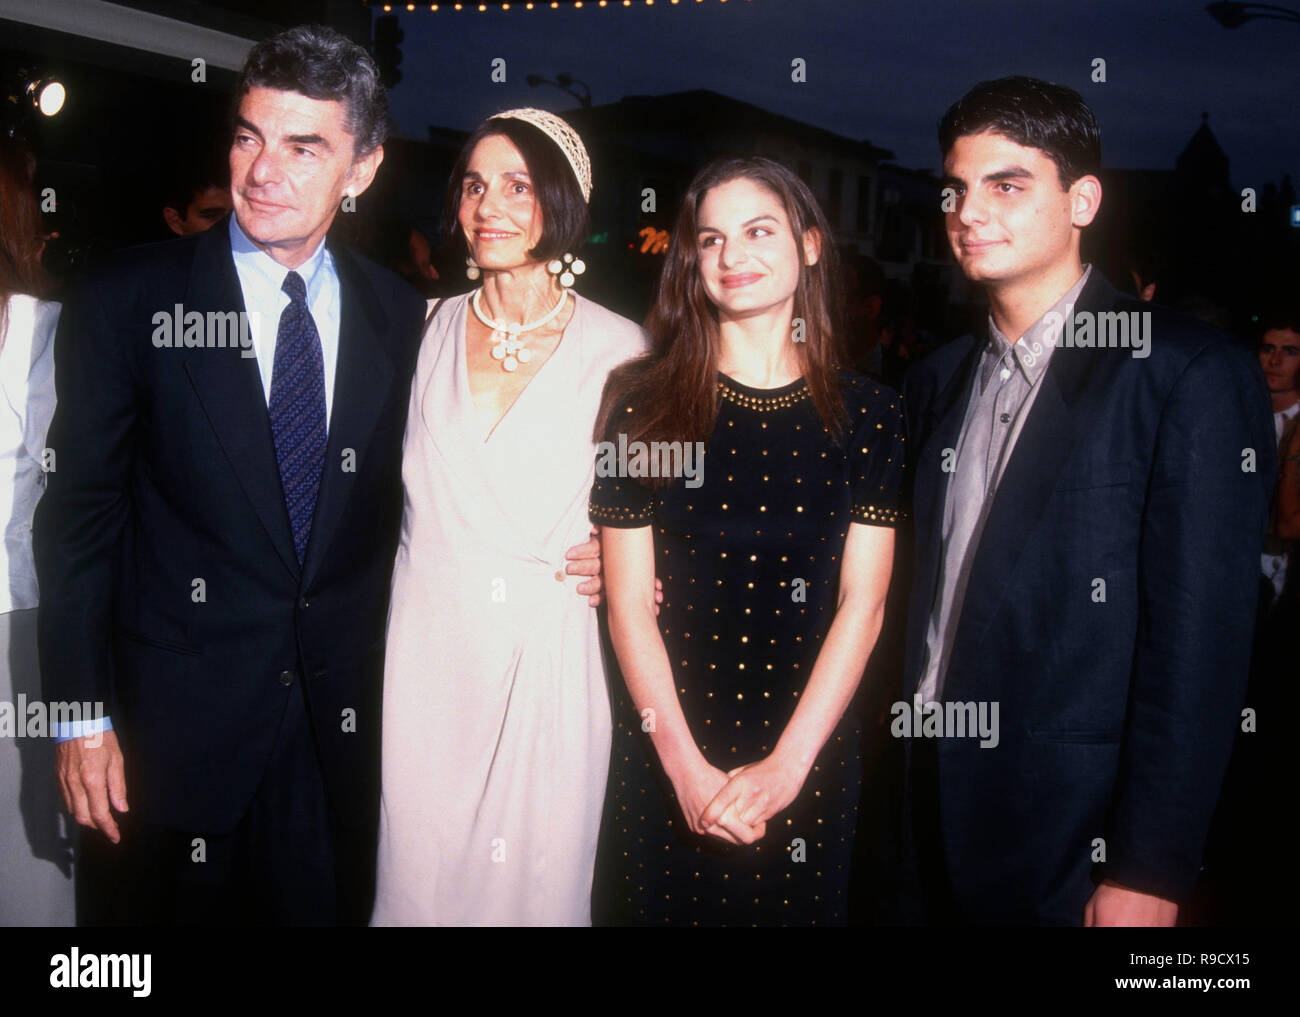 WESTWOOD, CA - MAY 27: Director Richard Benjamin, actress Paula Prentiss, daughter Prentiss Benjamin and son Ross Benjamin attend Warner Bros. Pictures' 'Made in America' Premiere on May 27, 1993 at Mann Bruin Theatre in Westwood, California. Photo by Barry King/Alamy Stock Photo Stock Photo